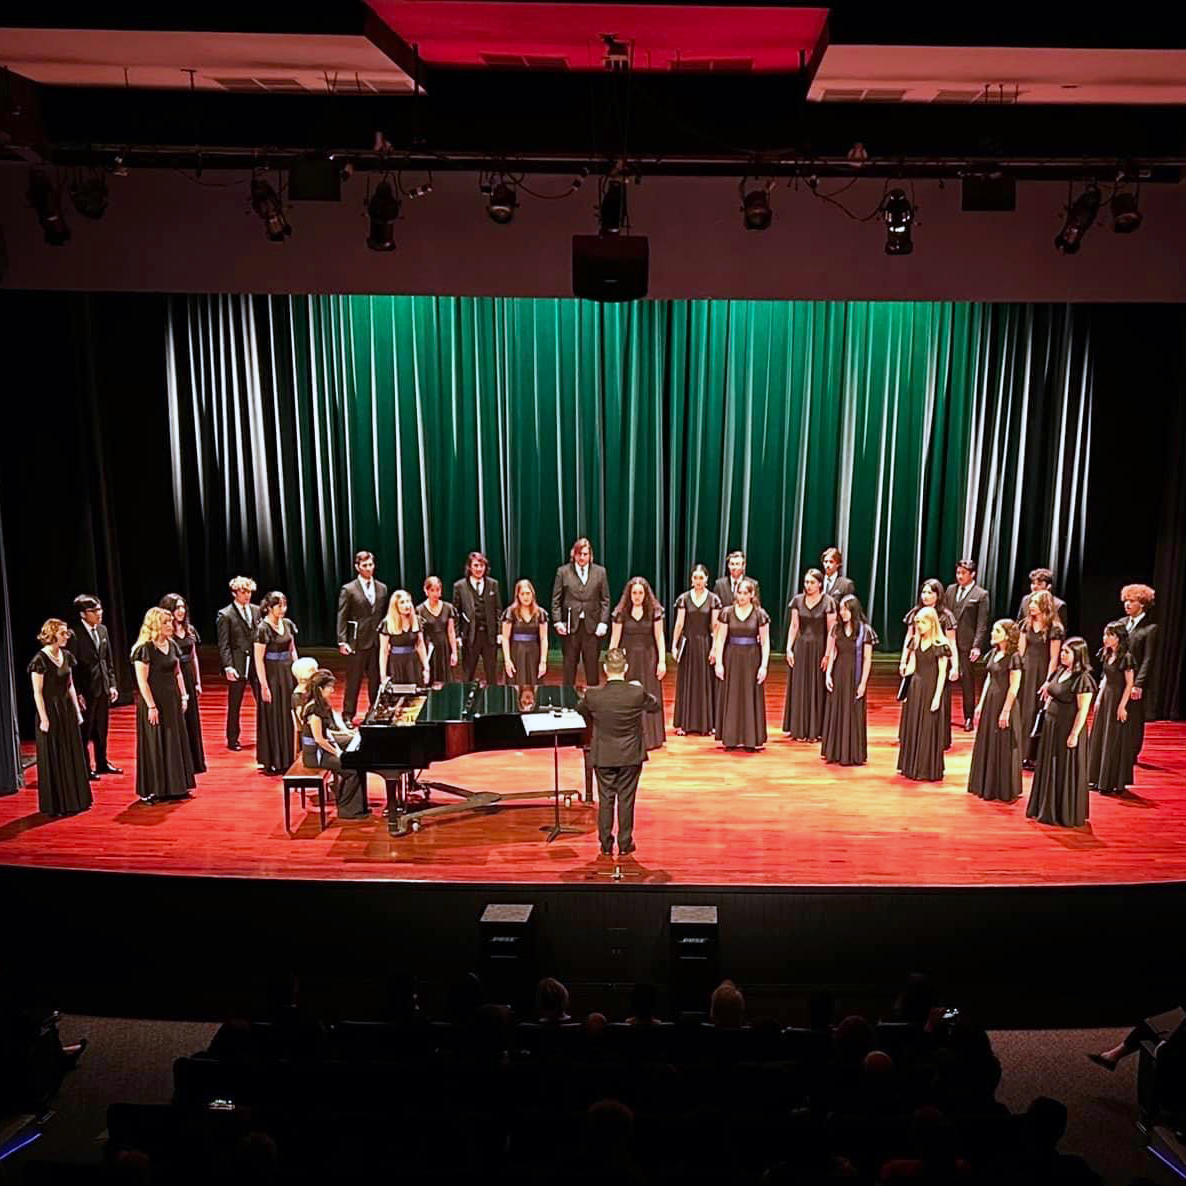 A large choir performs on stage